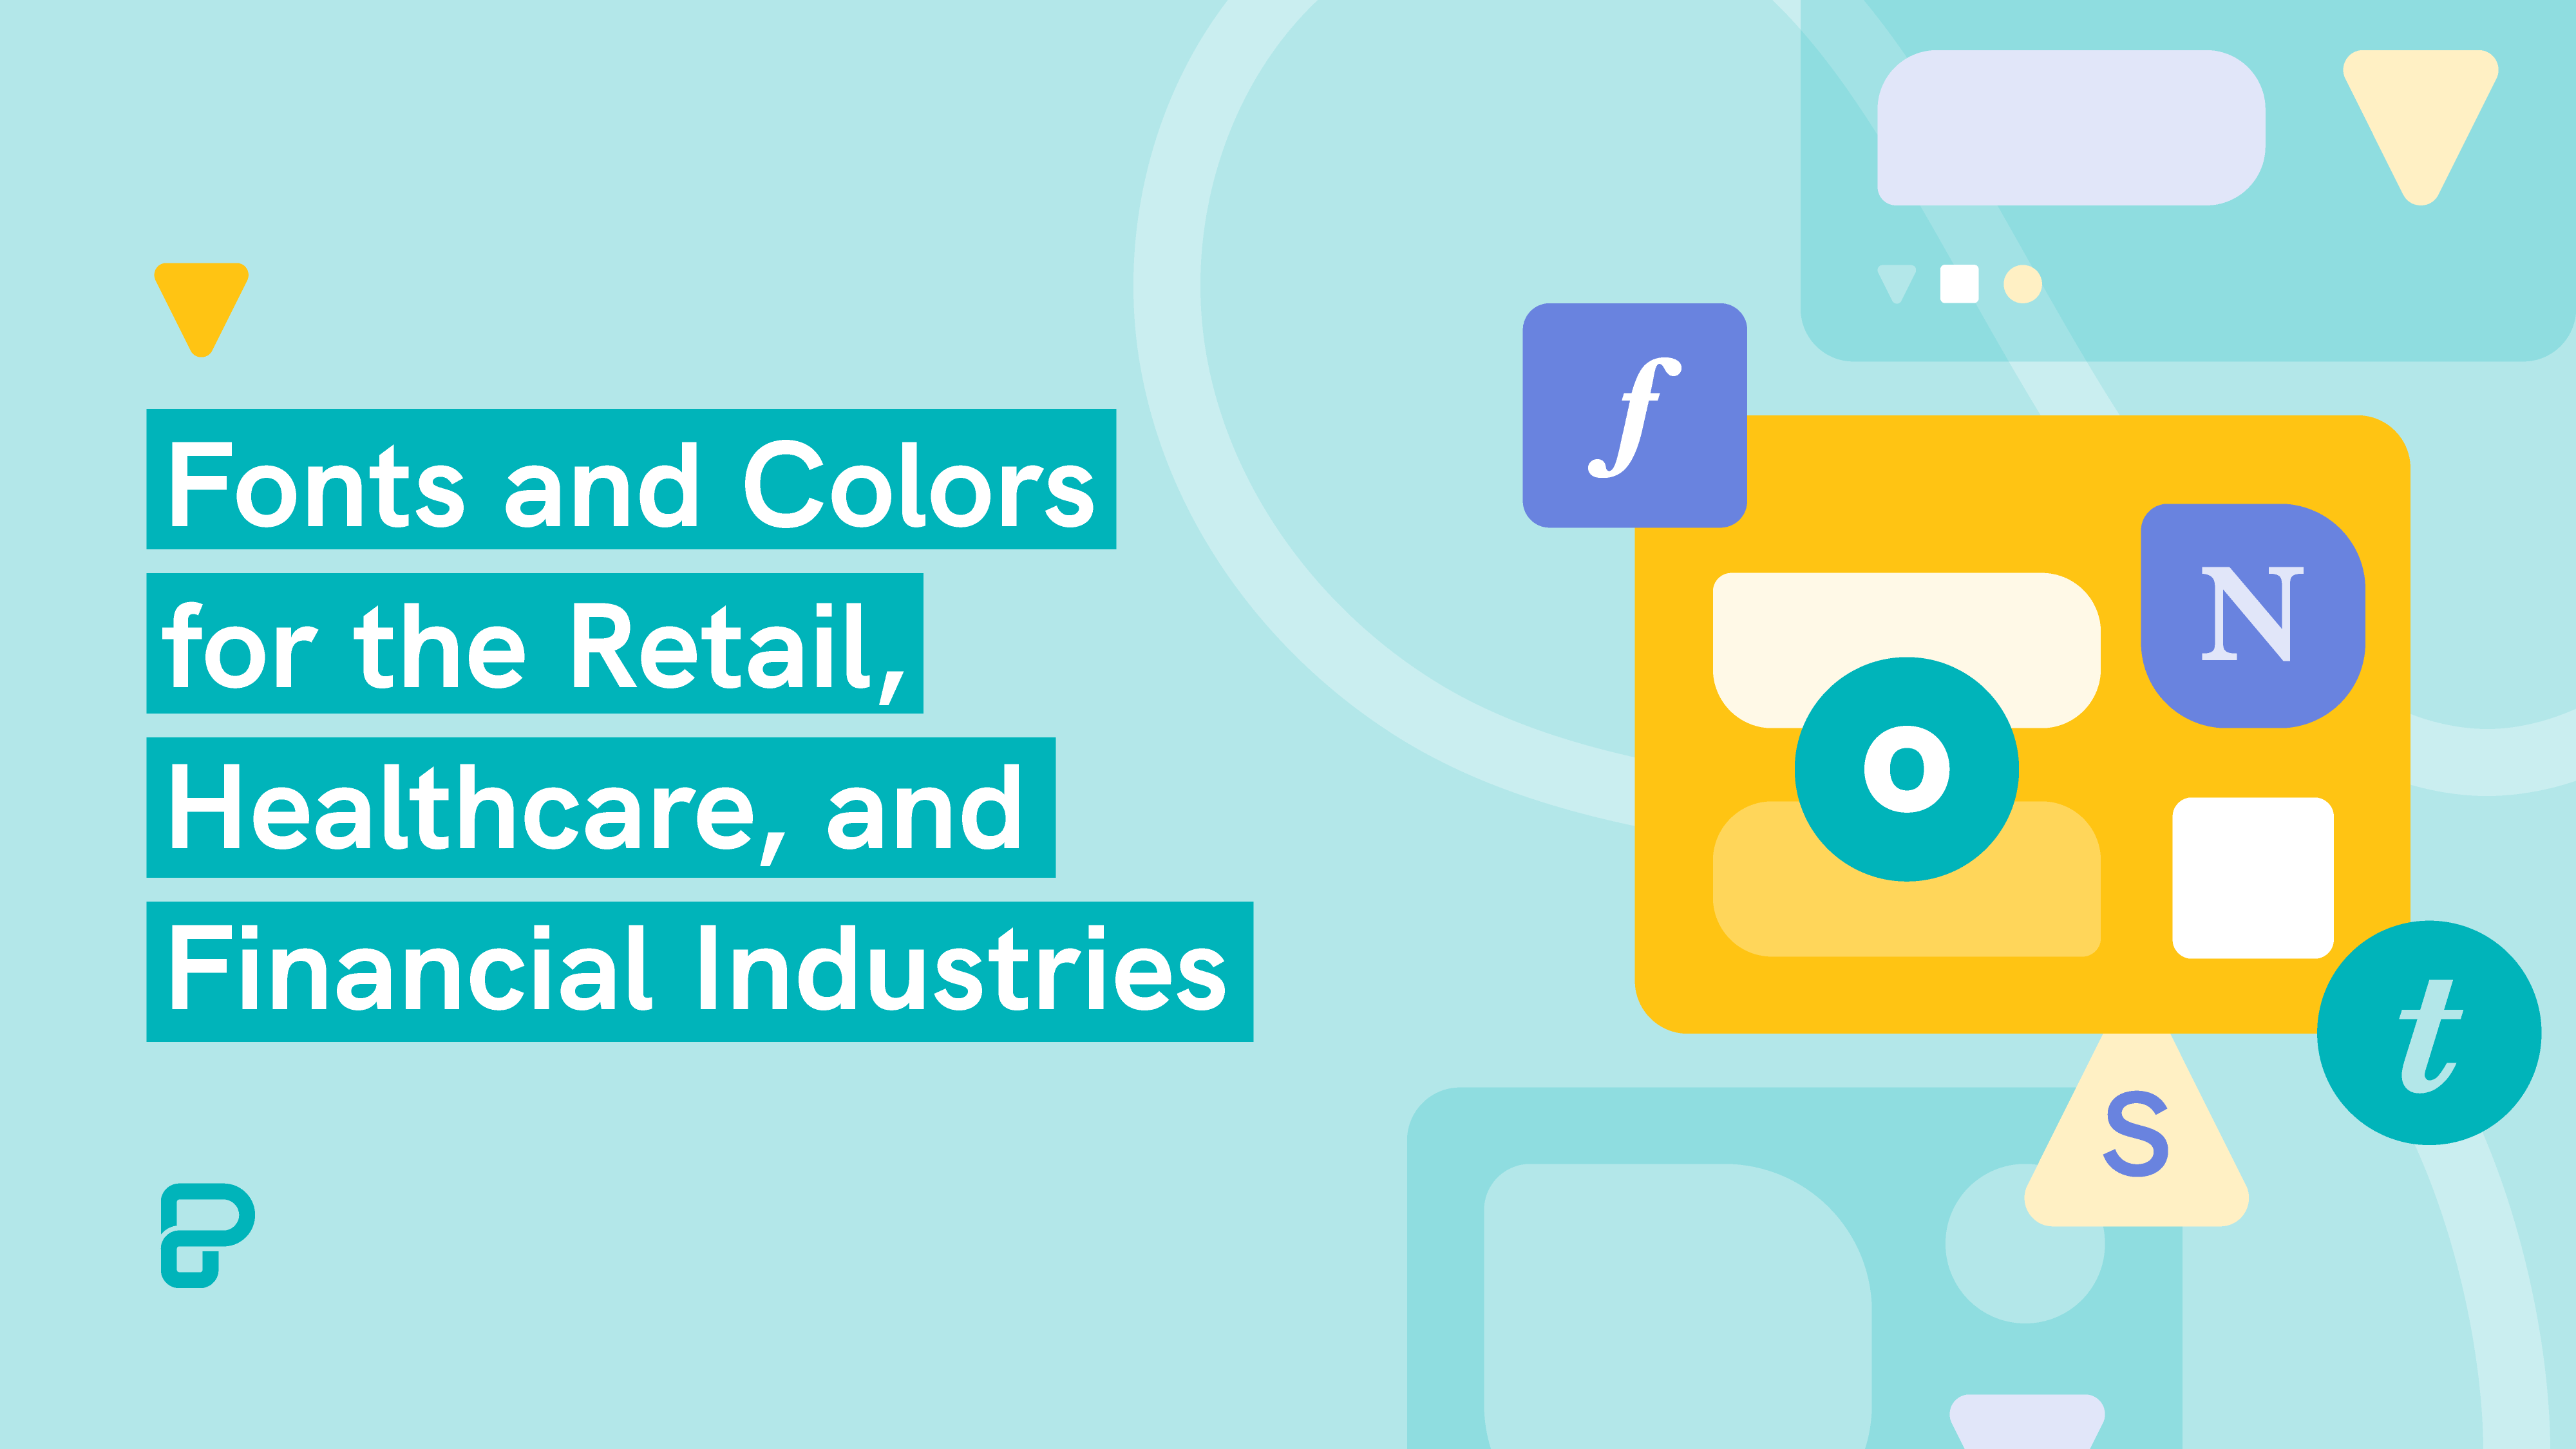 fonts and colors for the retail, healthcare, and financial industries